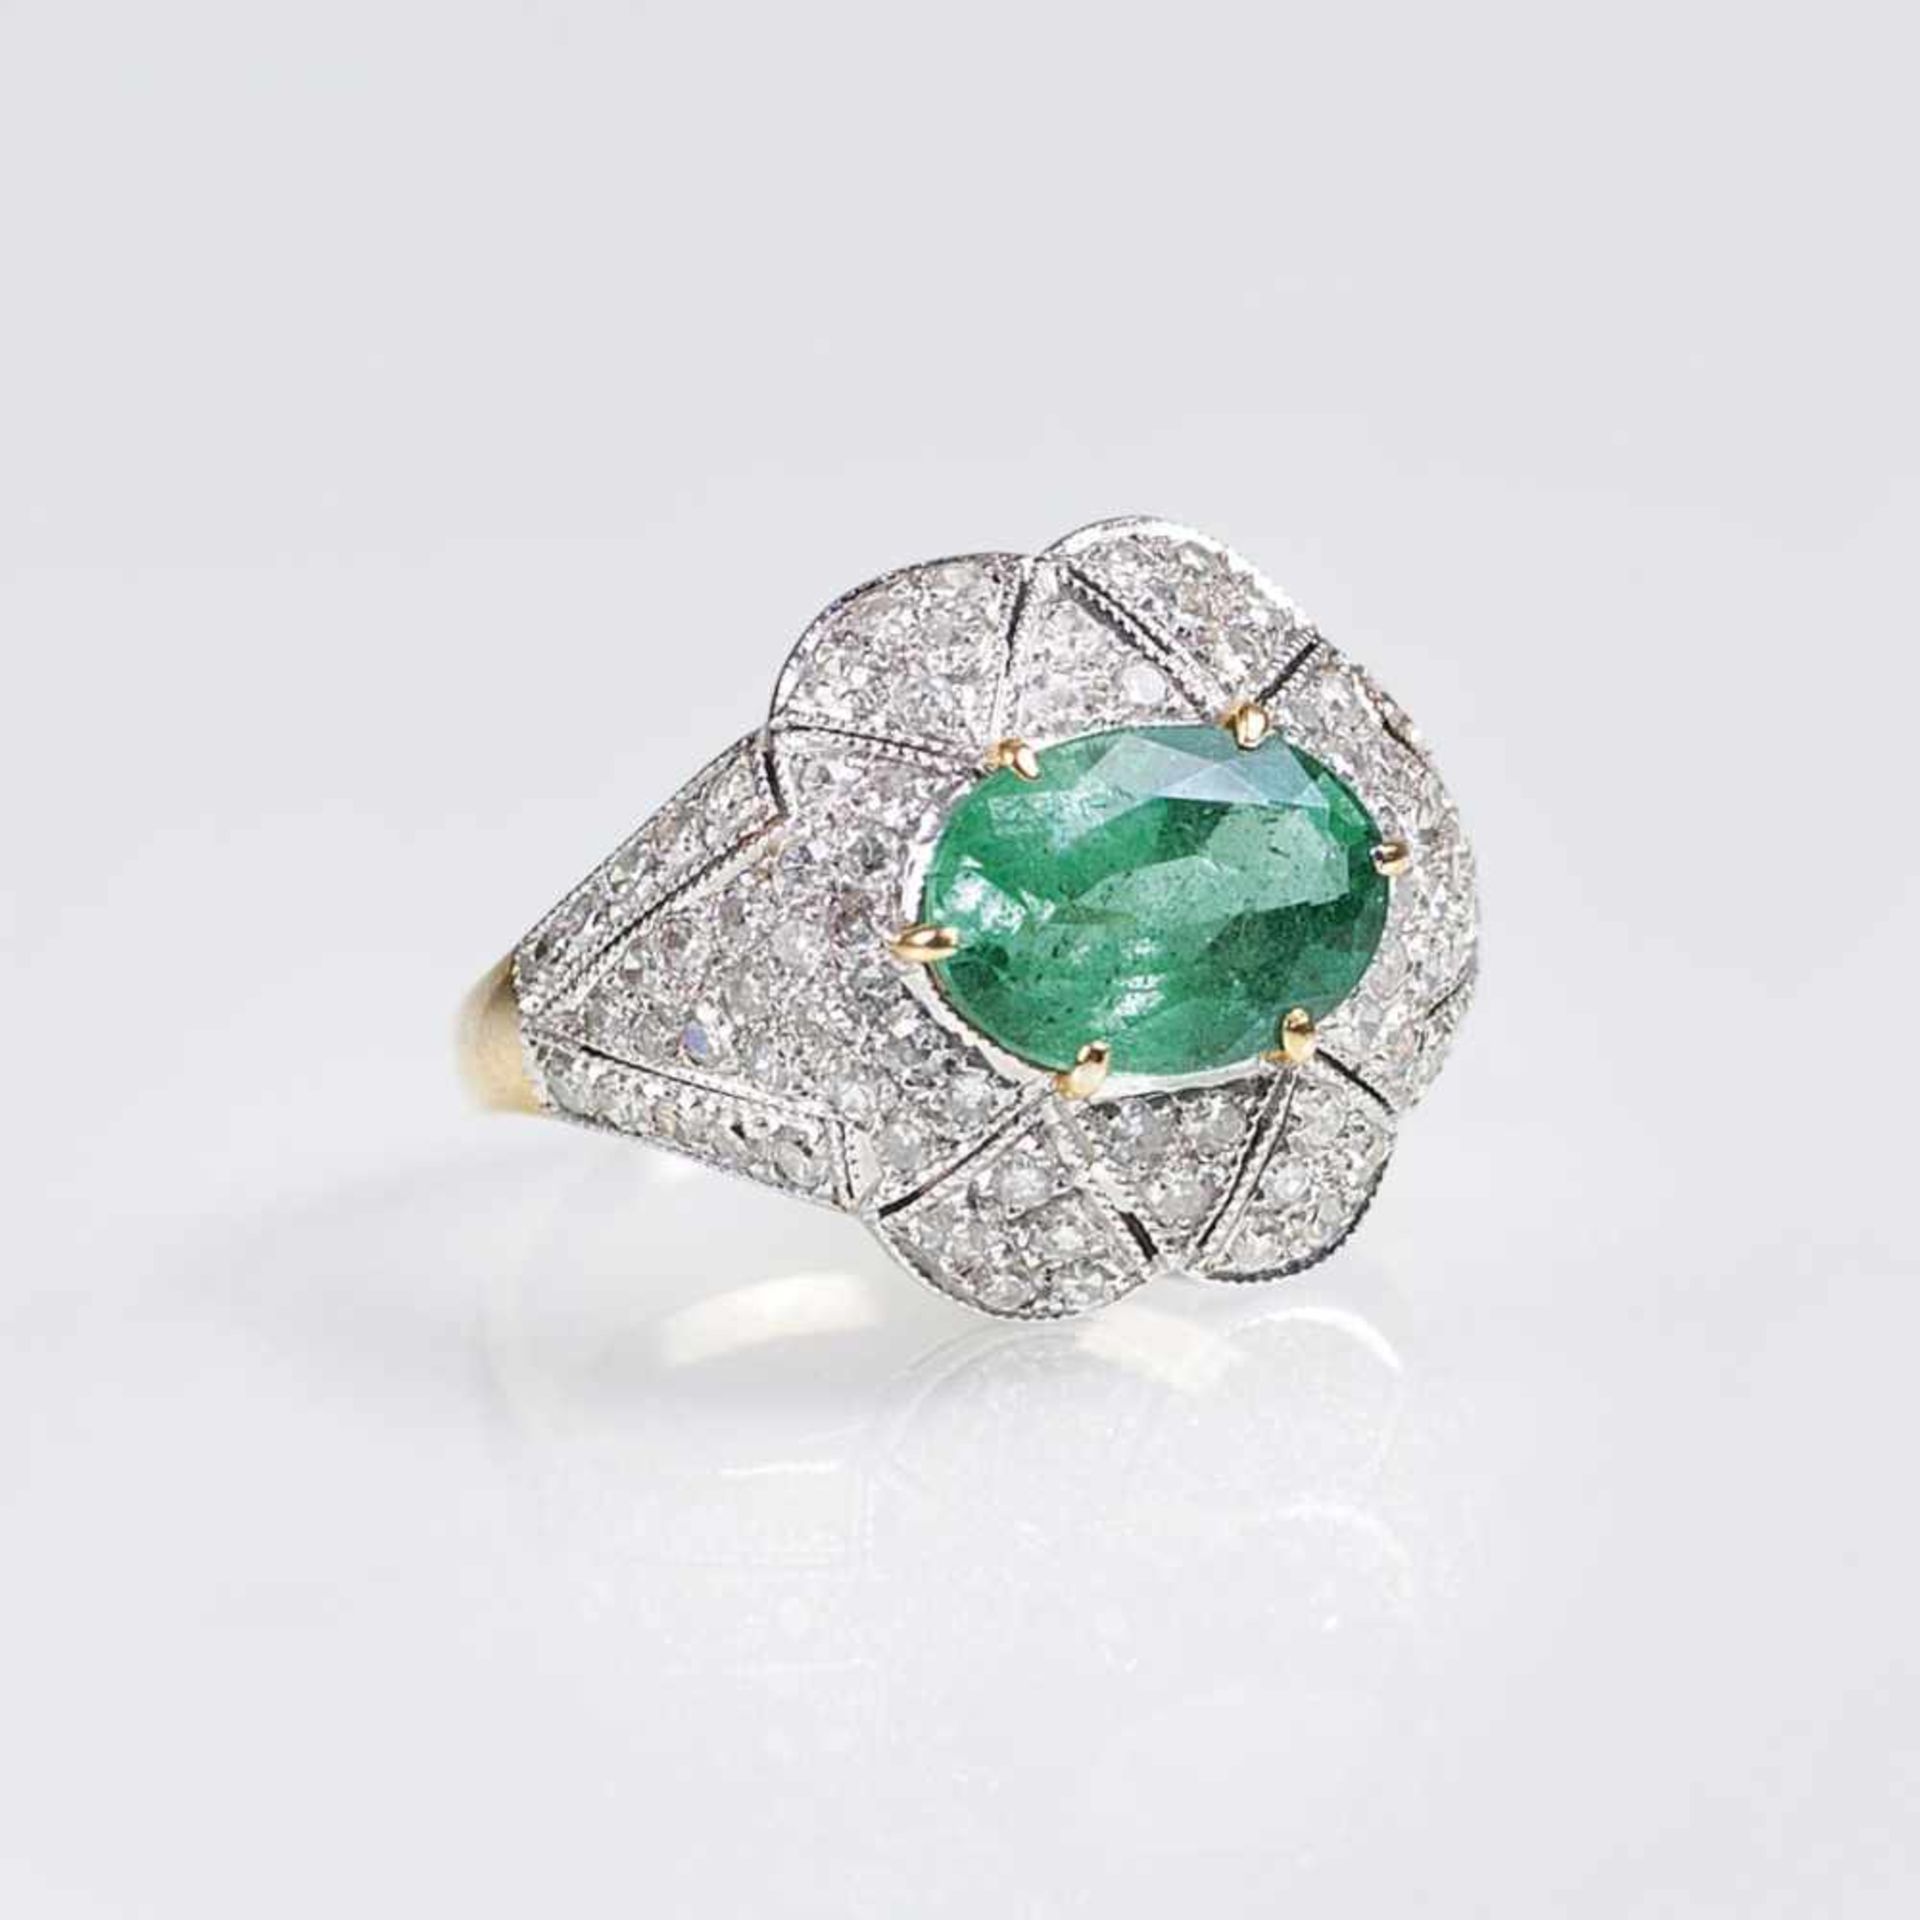 An Emerald Diamond Ring18 ct. yellow gold with white gold, marked. In front one emerald in oval